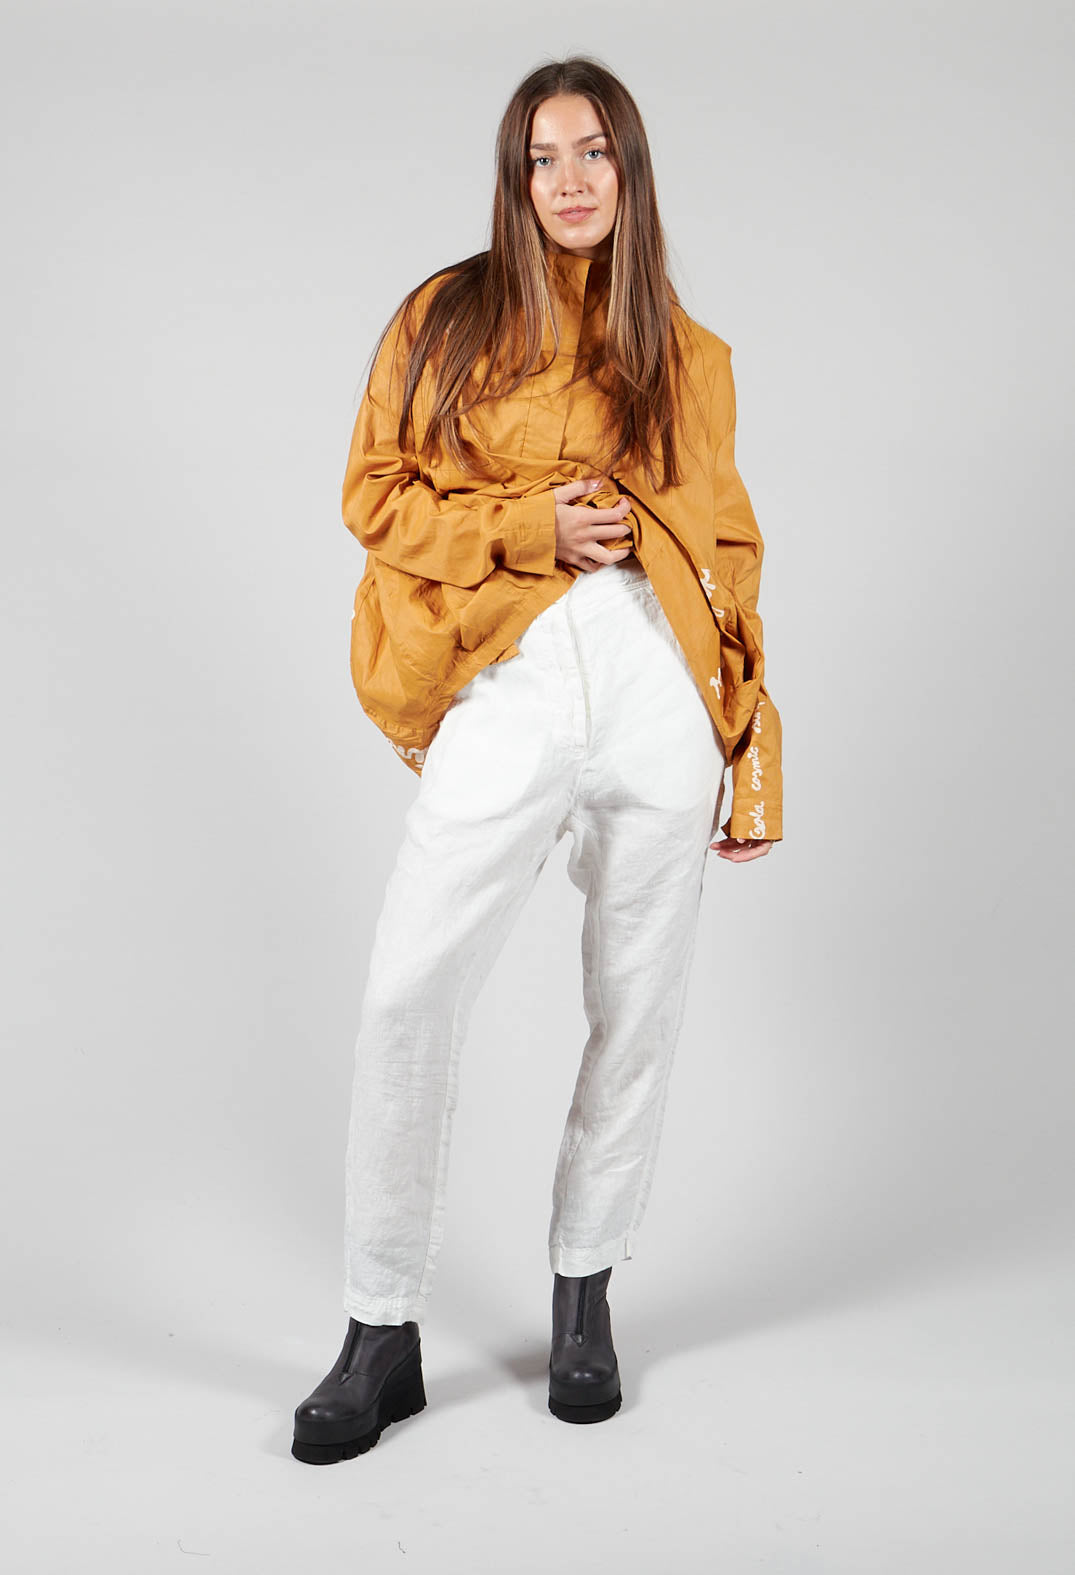 Straight Leg Linen Trousers in Offwhite